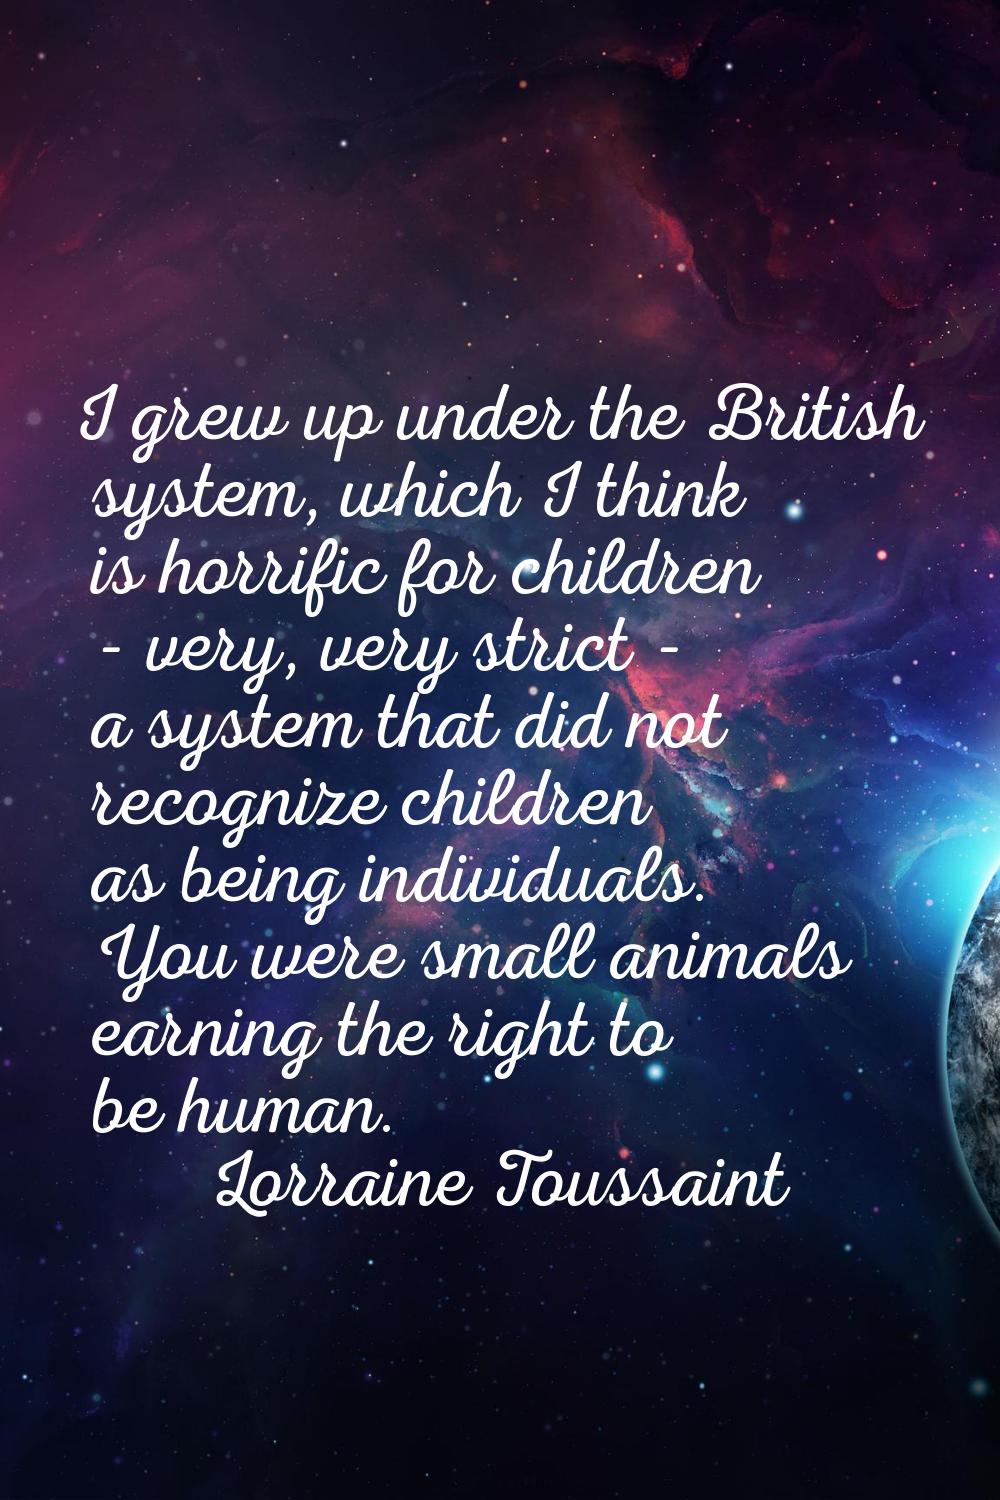 I grew up under the British system, which I think is horrific for children - very, very strict - a 